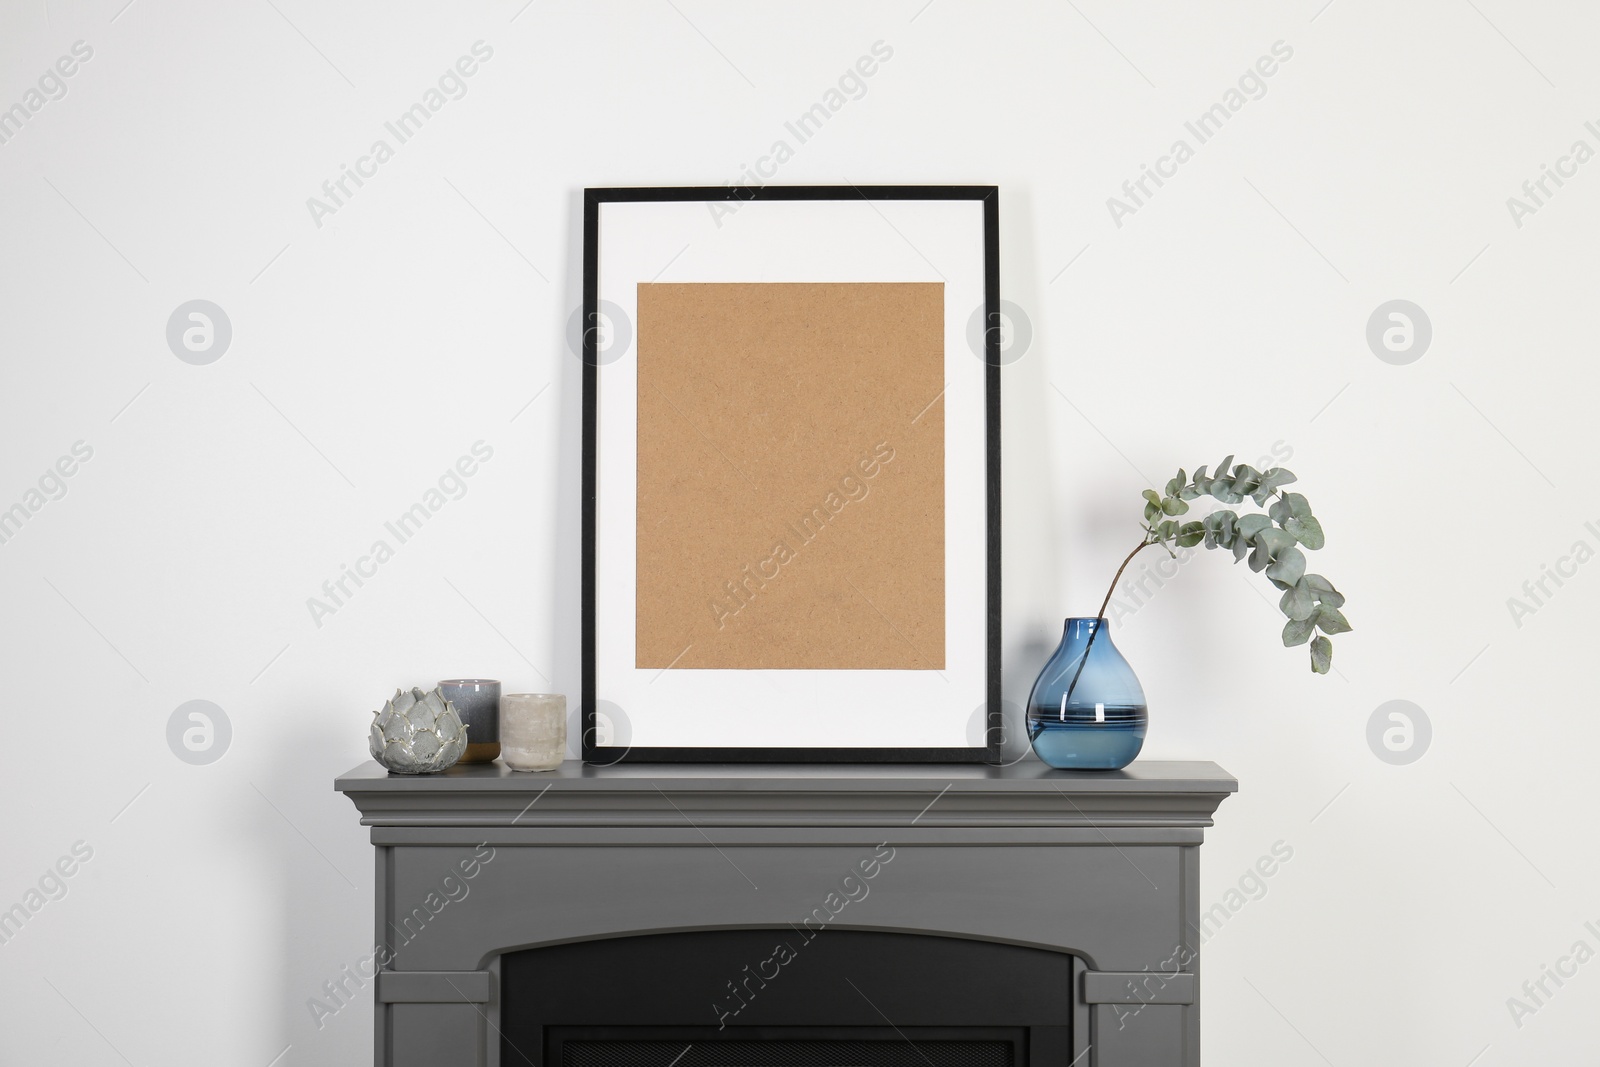 Photo of Empty frame, candles and eucalyptus branch in vase on fireplace near white wall indoors. Interior design